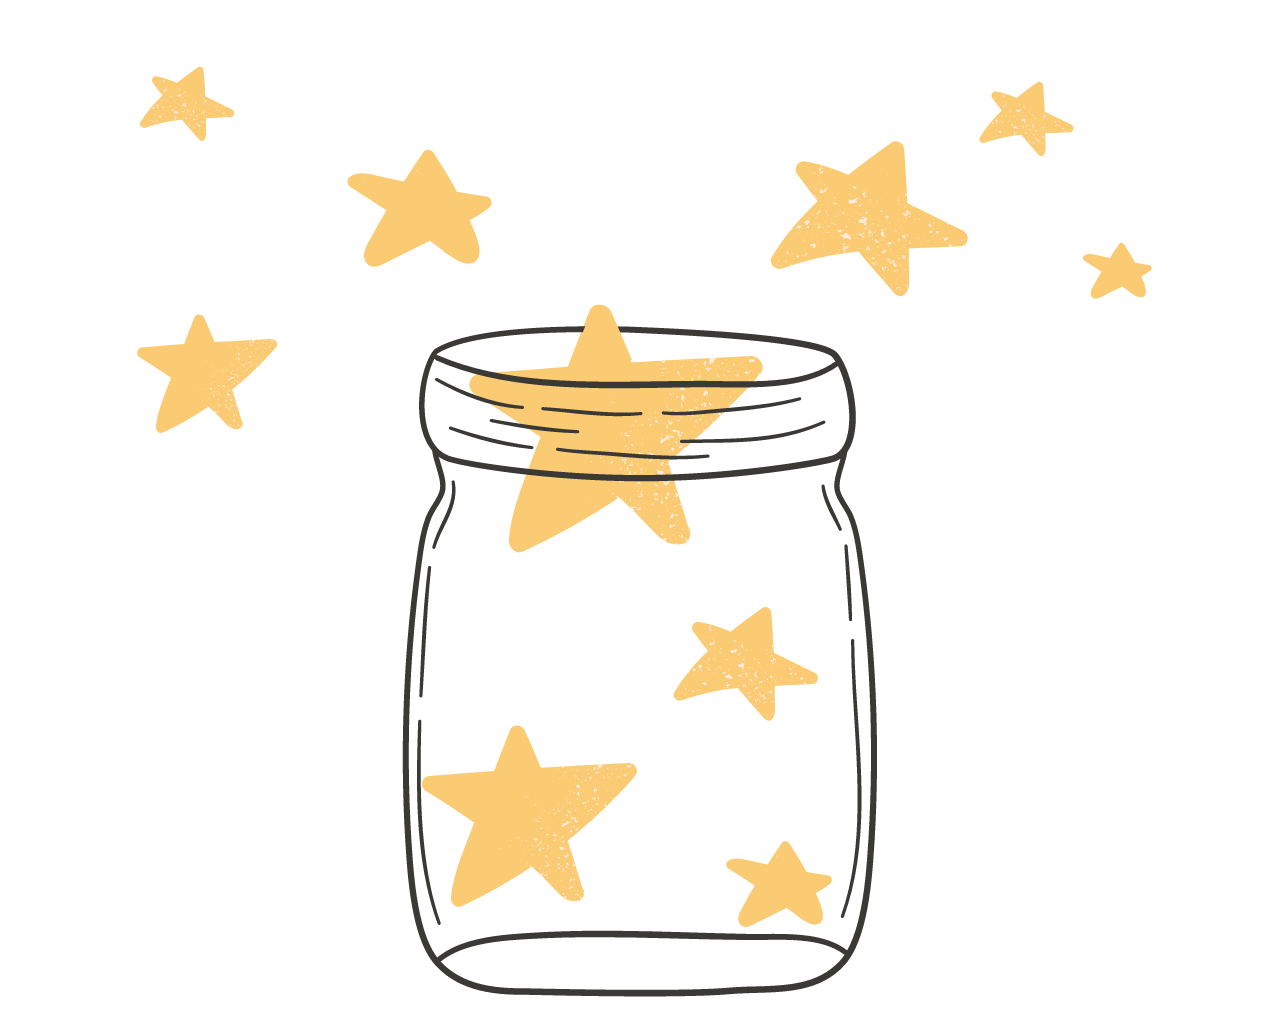 A jar filled with stars, topped by a shining star